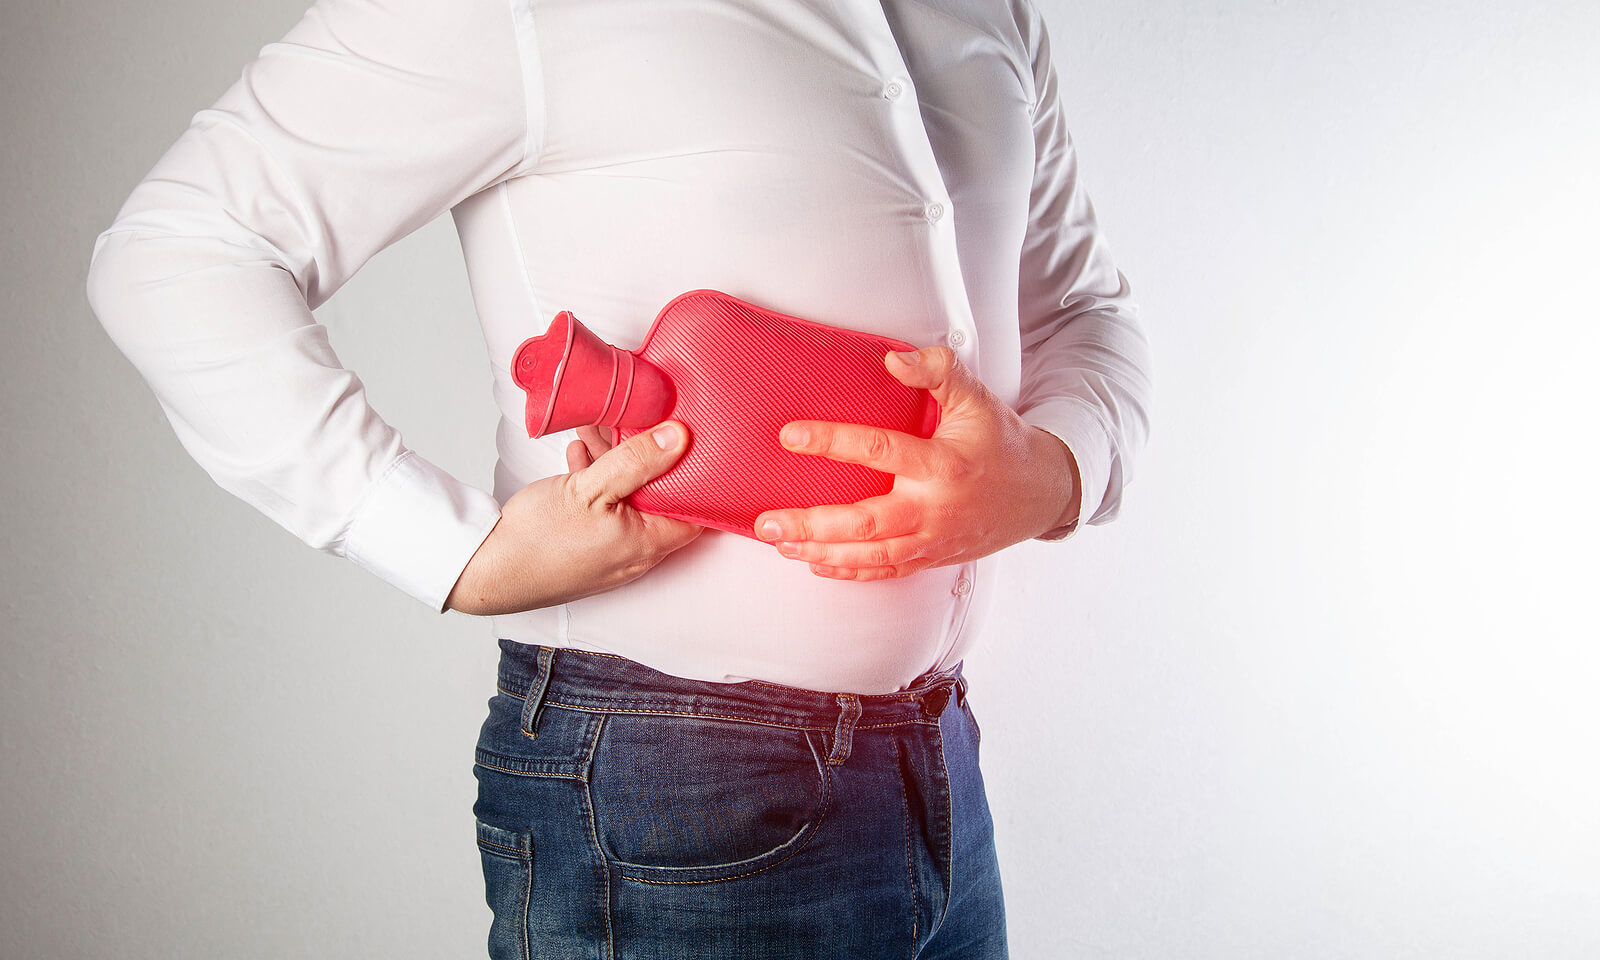 Using a Hot Water Bottle to Aid Abdominal Strain Recovery